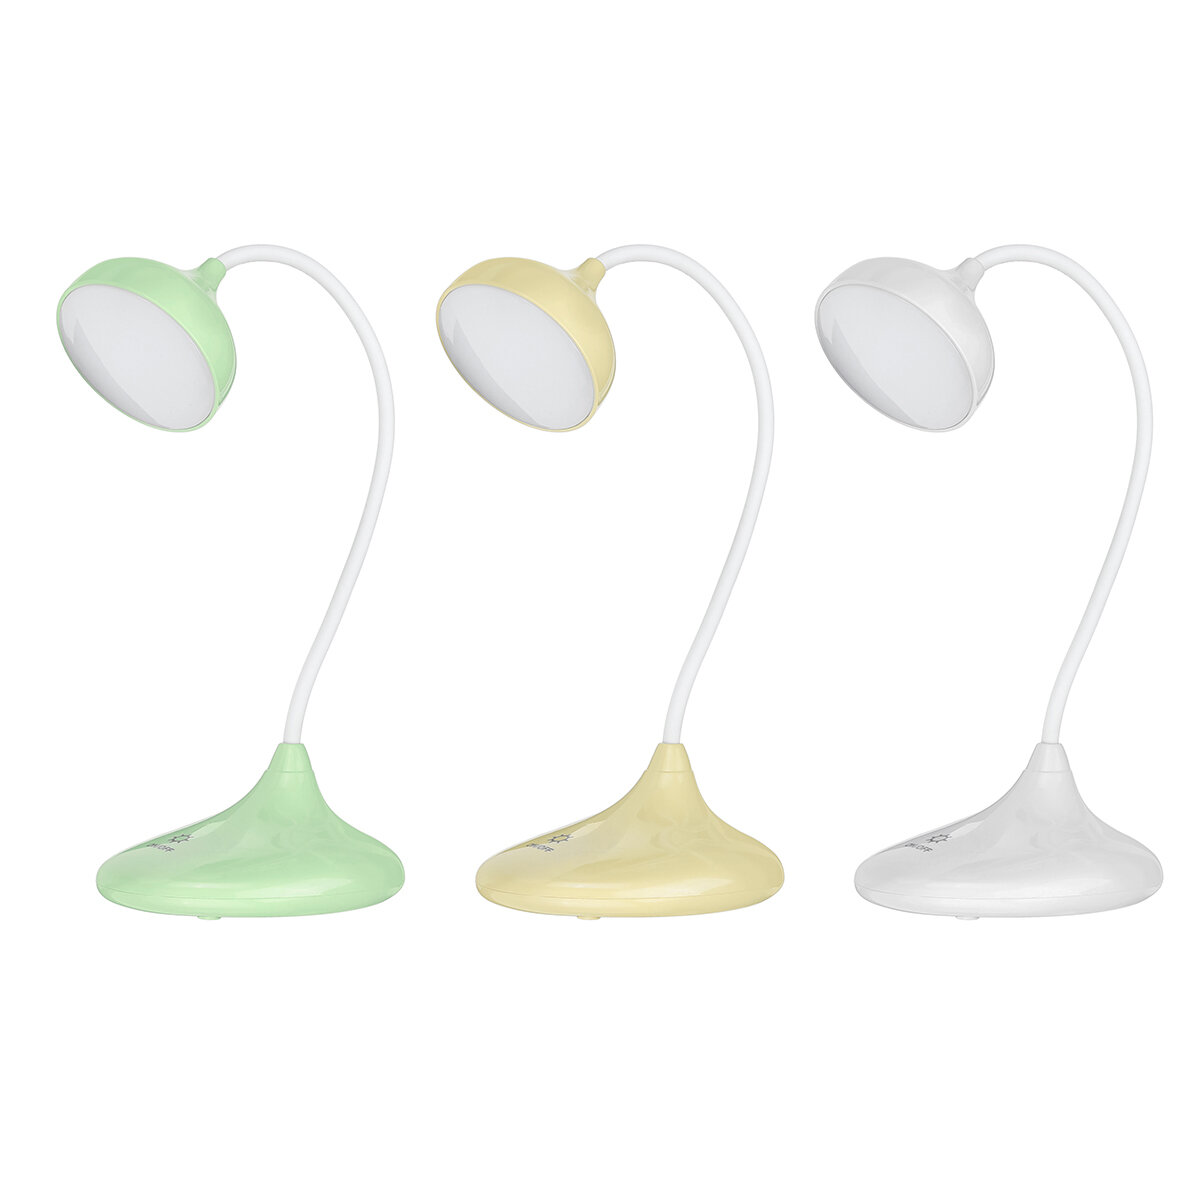 360° Rotating LED Desk Lamp Eye-caring Table Lamps with USB Charging Port 3 Brightness Levels Touch Control